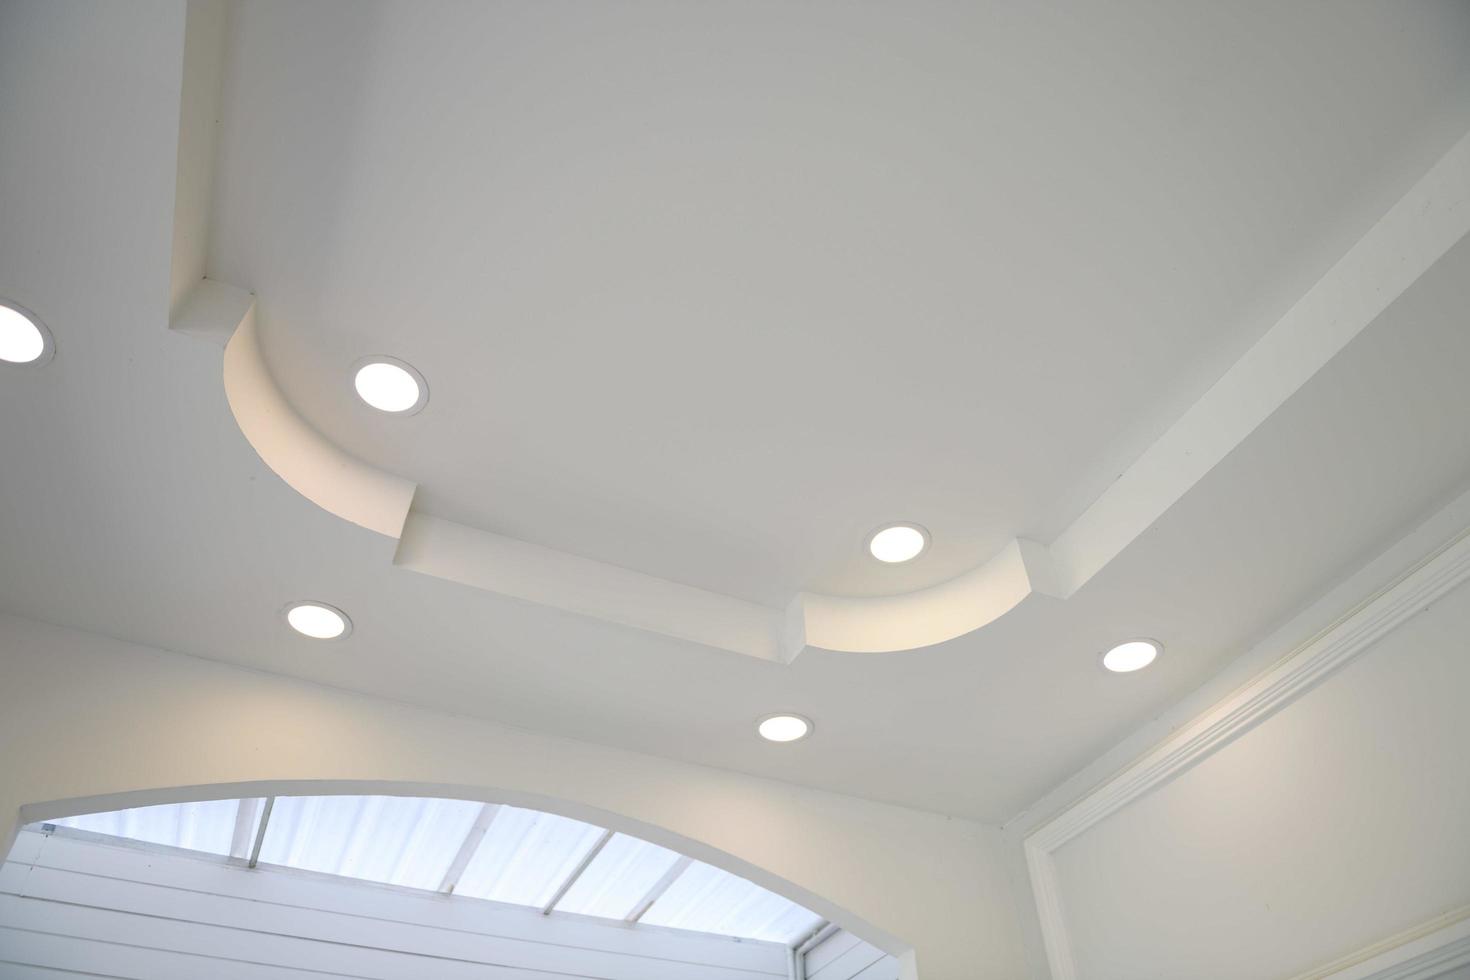 Stretch ceiling white and complex shape. ceiling with halogen spots lamps and drywall construction in empty room in exhibition hall or house. photo